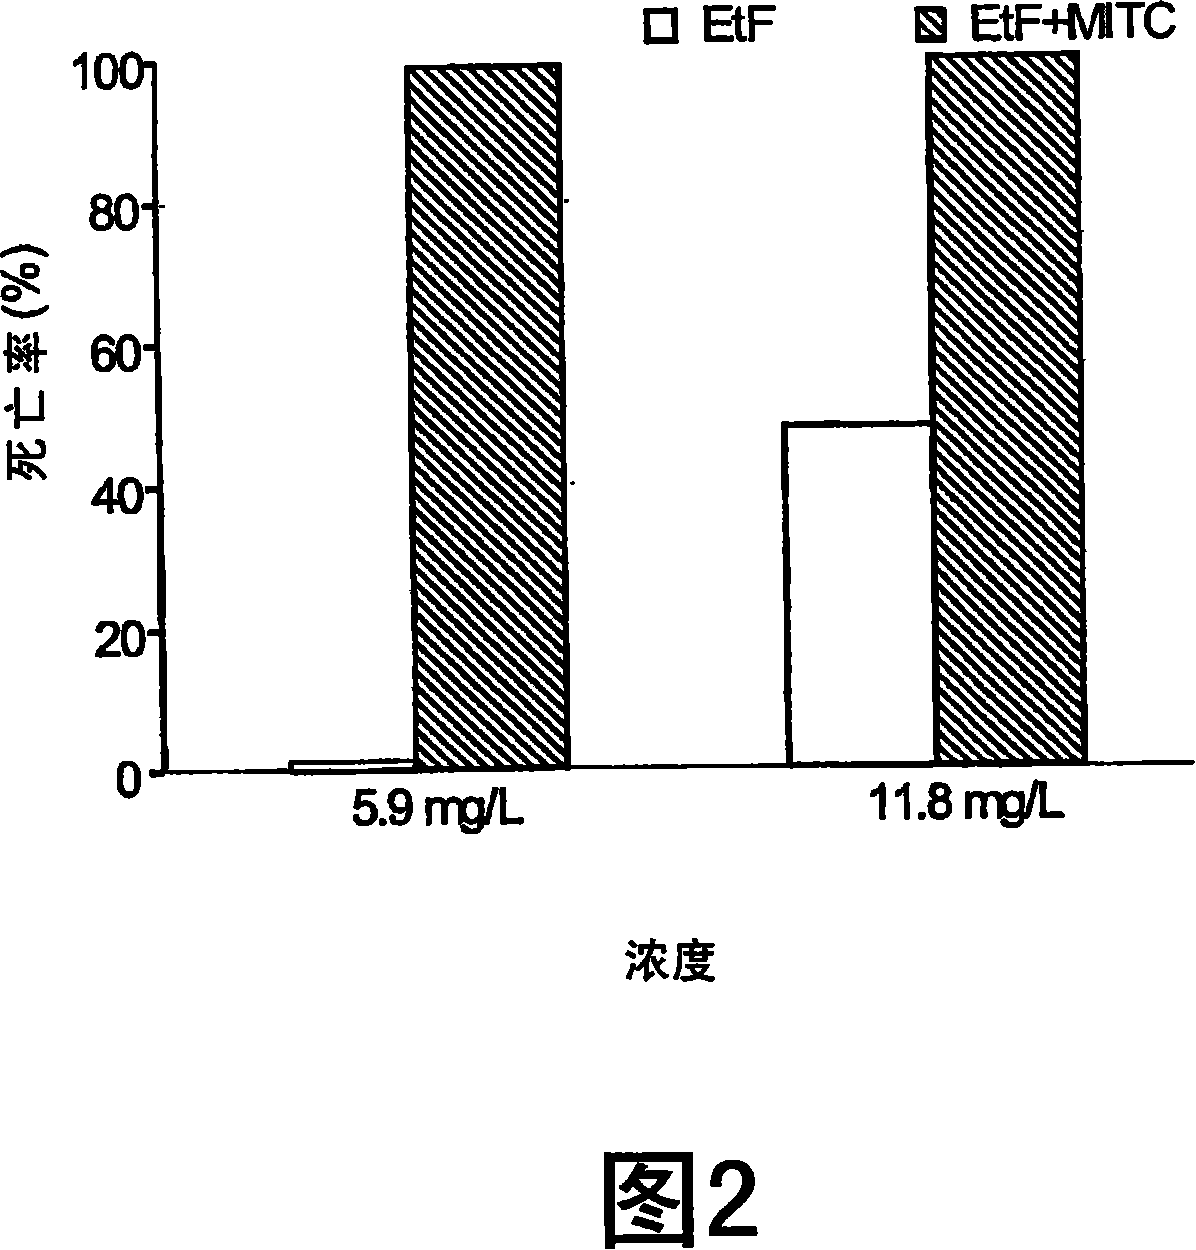 Pesticide compositions and methods